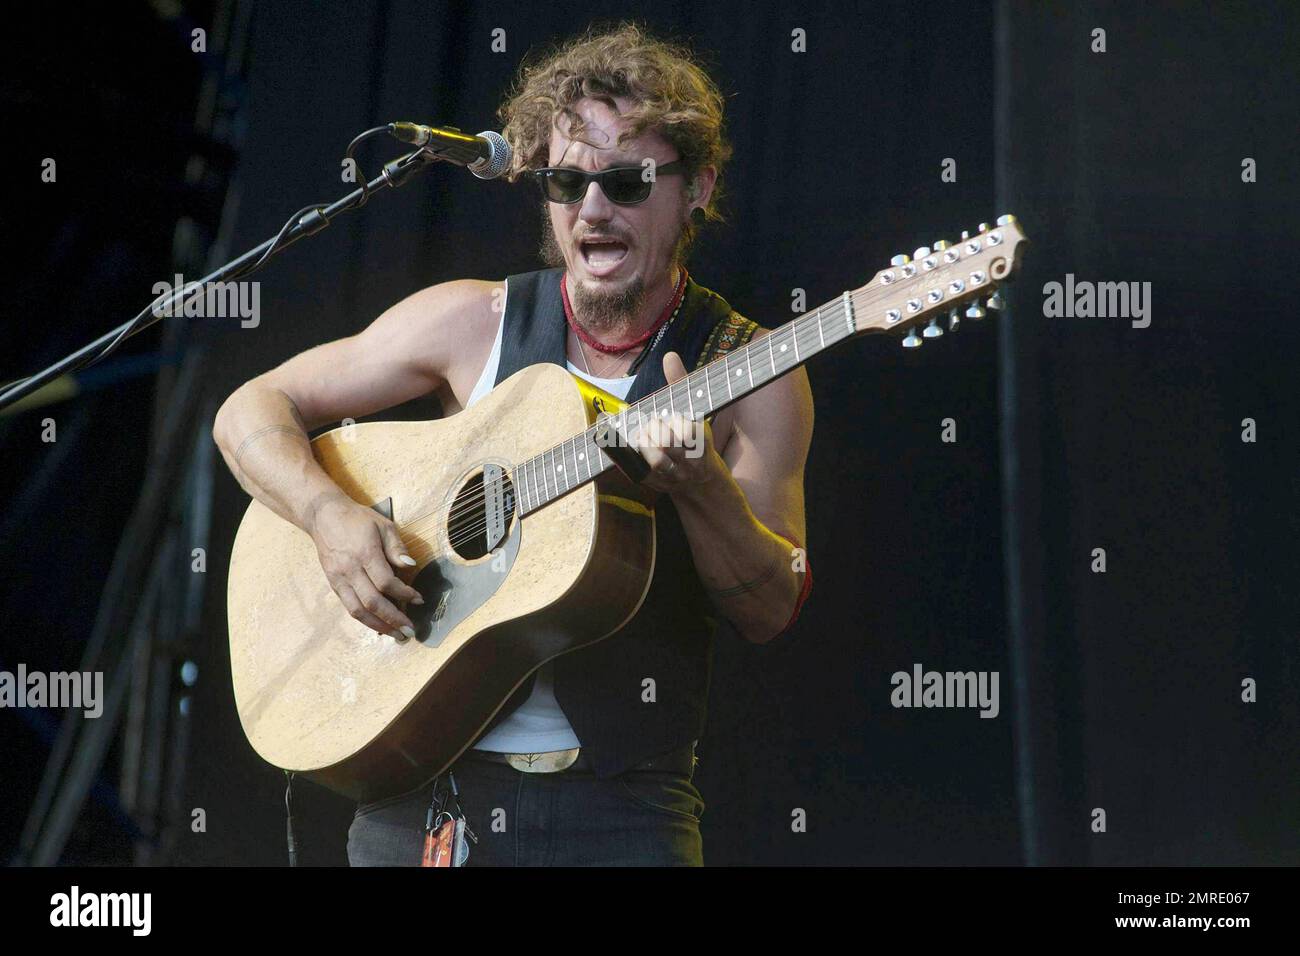 Australian musician John Butler sings and plays the guitar and bango during  a performance with the funk rock and bluegrass band John Butler Trio at the  annual Big Day Out music festival